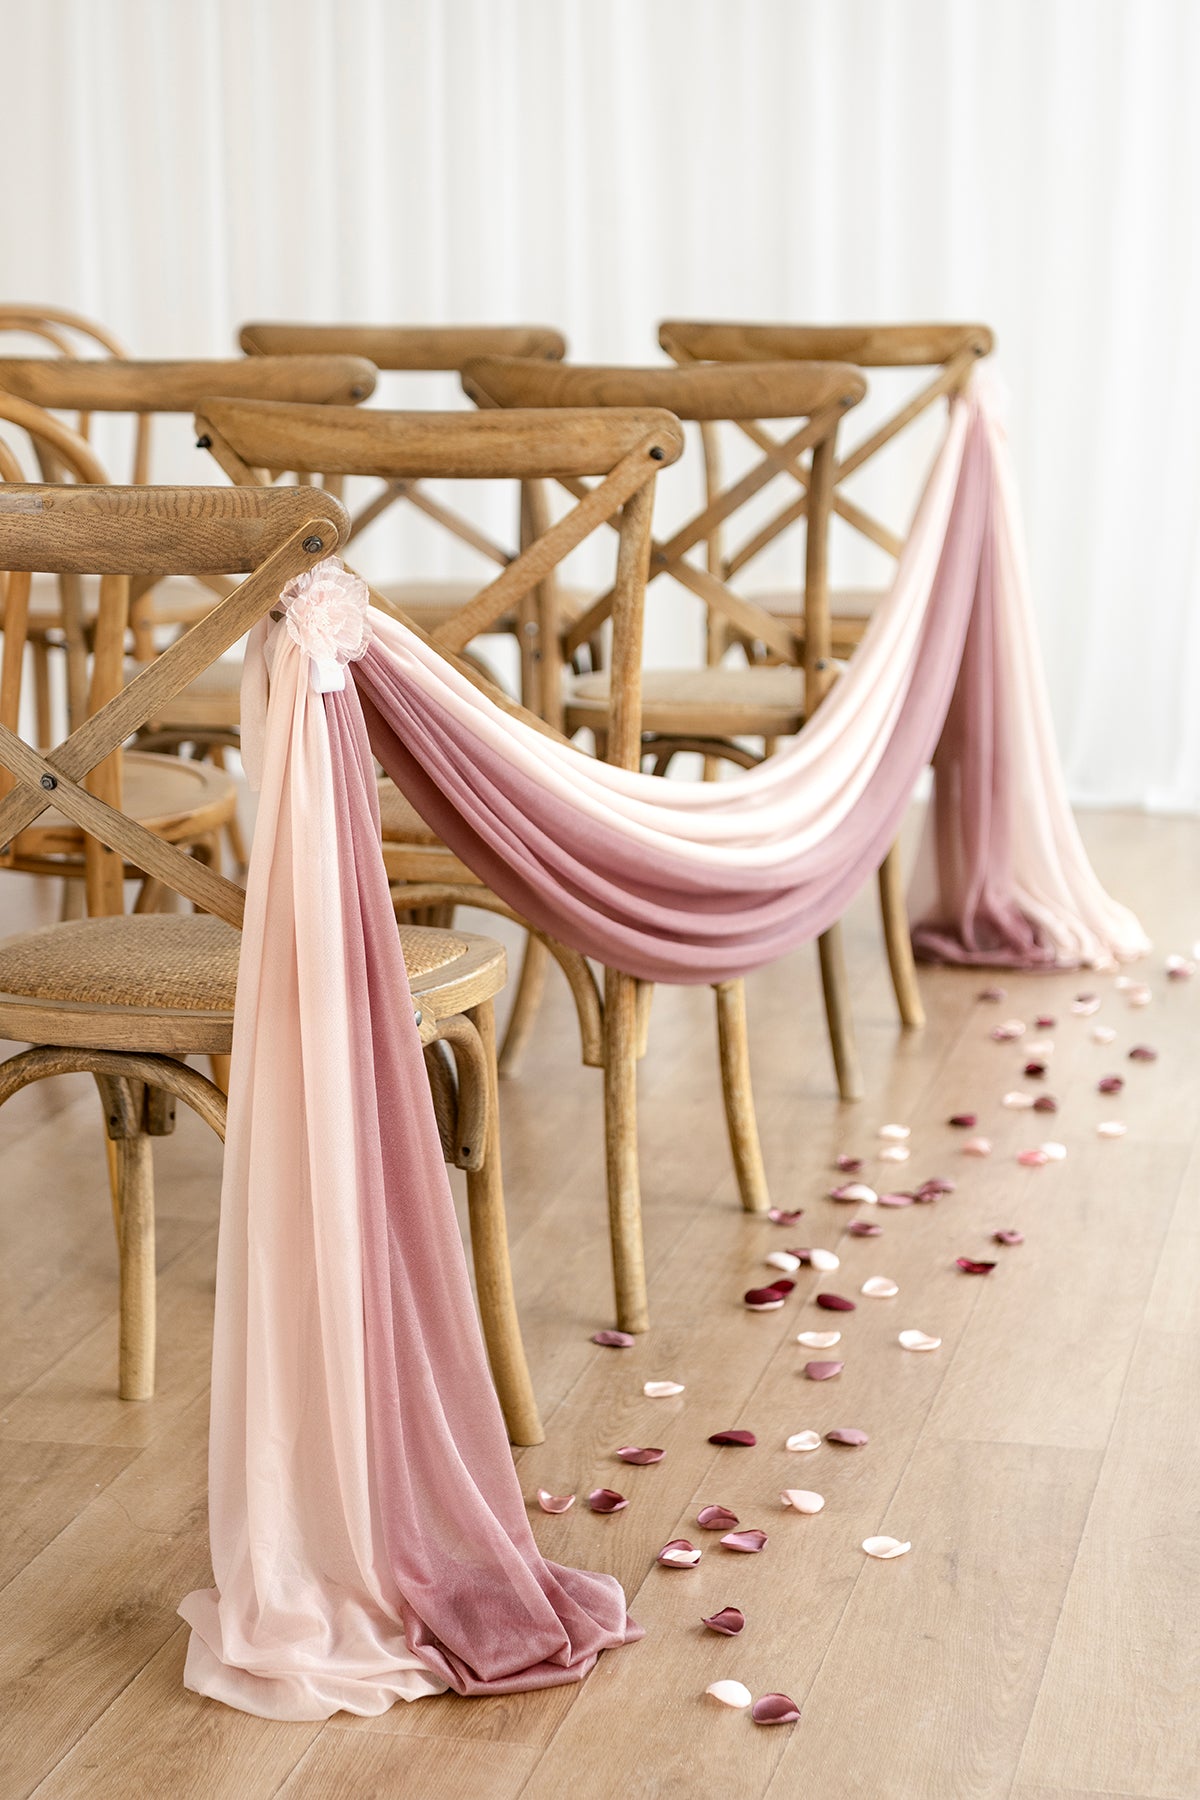 Sheer Aisle Swags for Church Wedding in Dusty Rose & Mauve